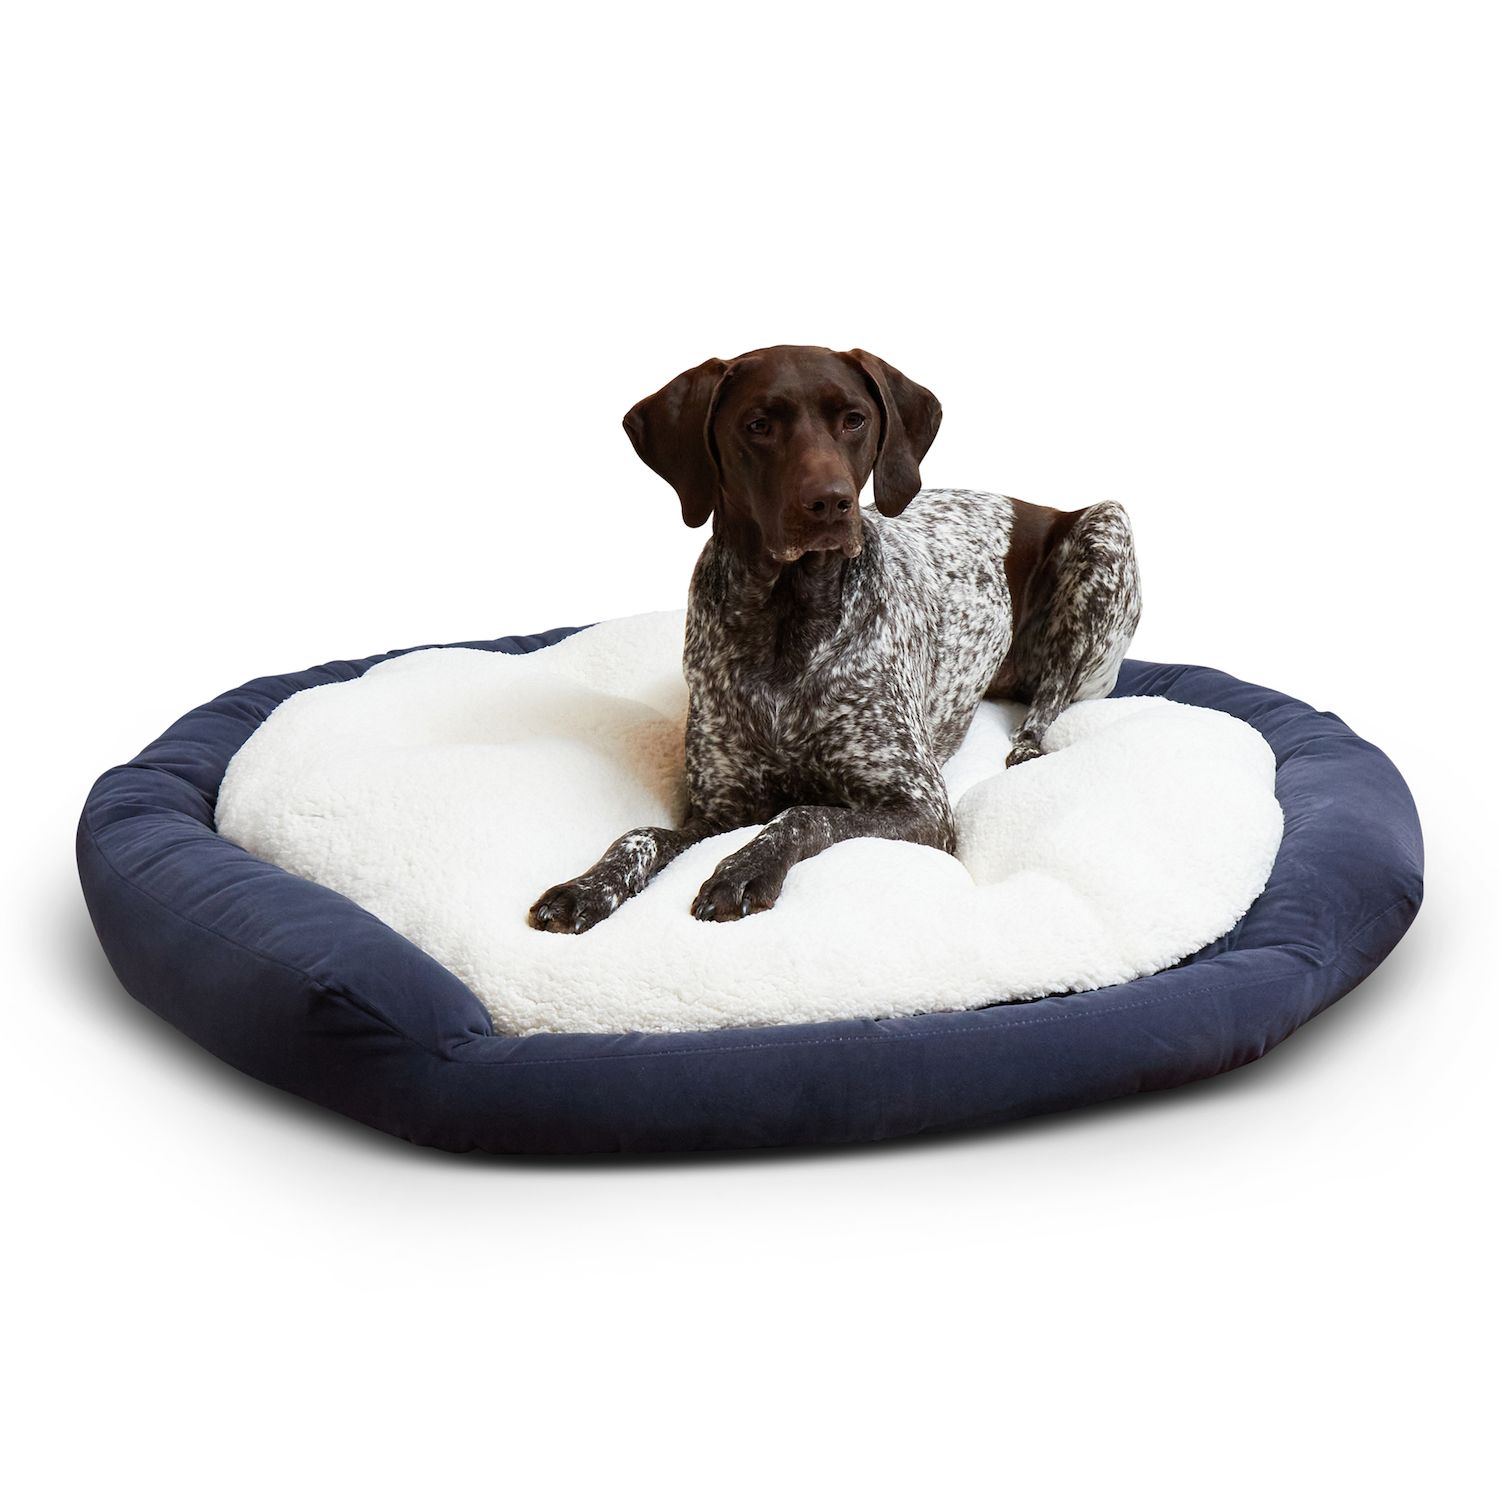 Image for Happy Hounds Murphy Donut Pet Bed at Kohl's.